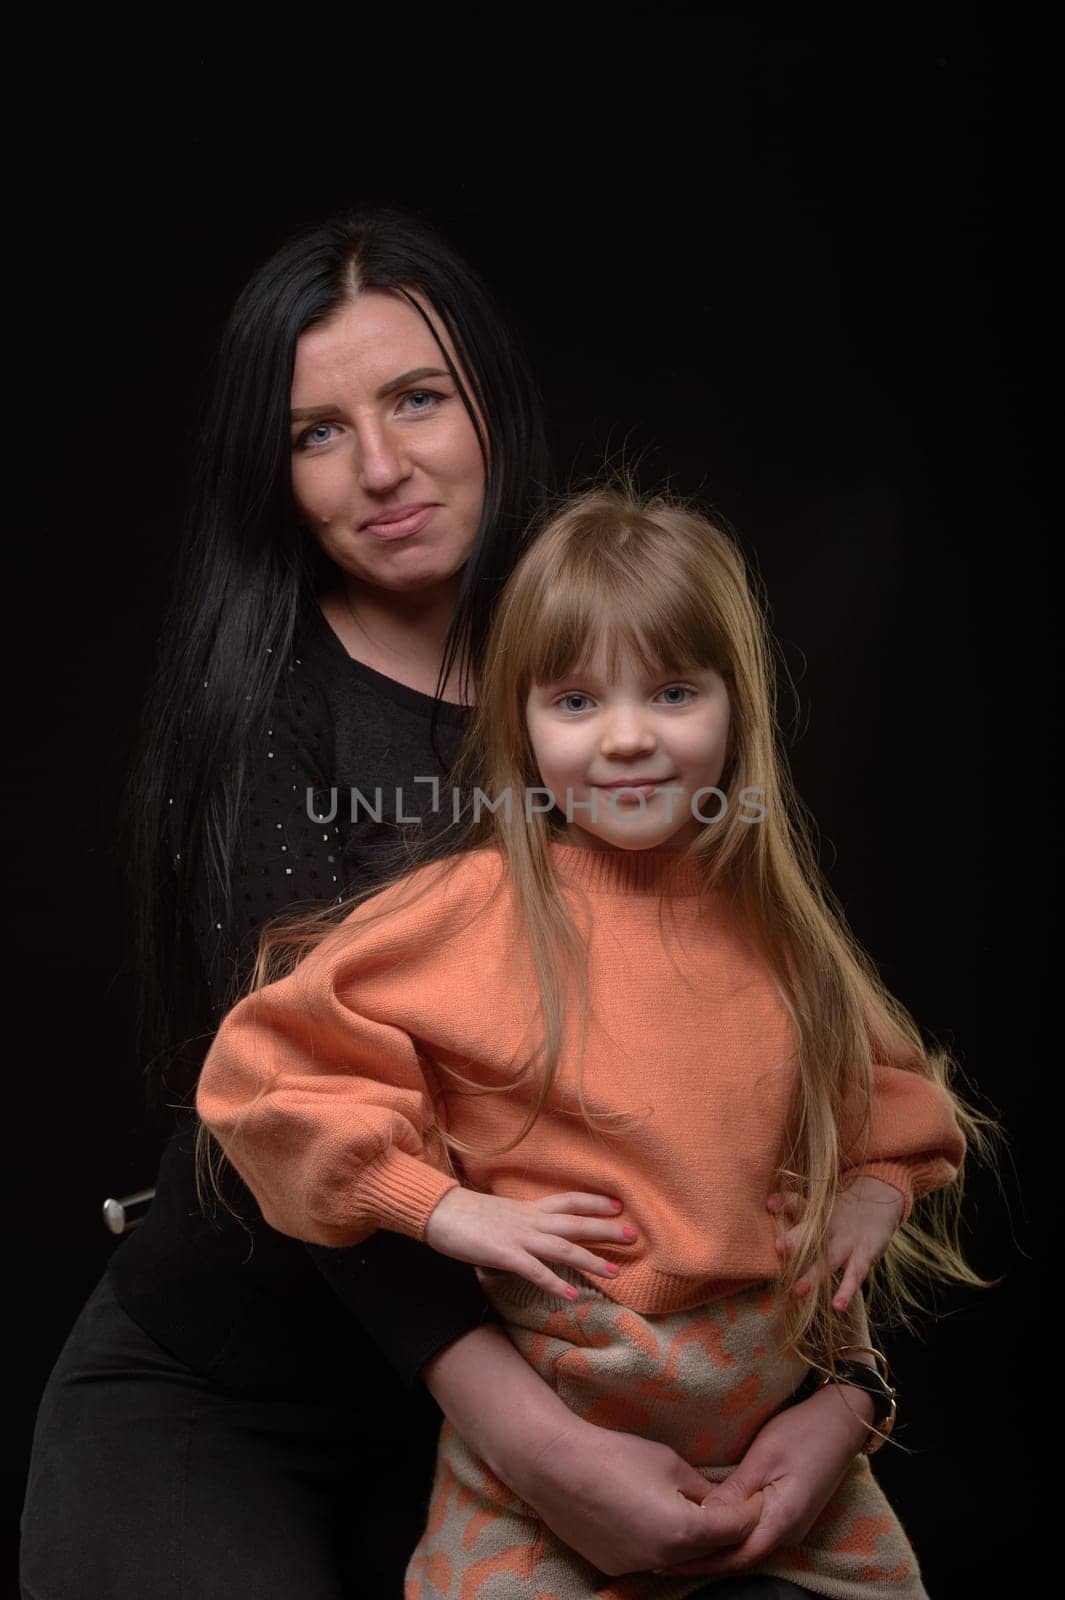 mother and daughter studio portrait happy family 6 by Mixa74